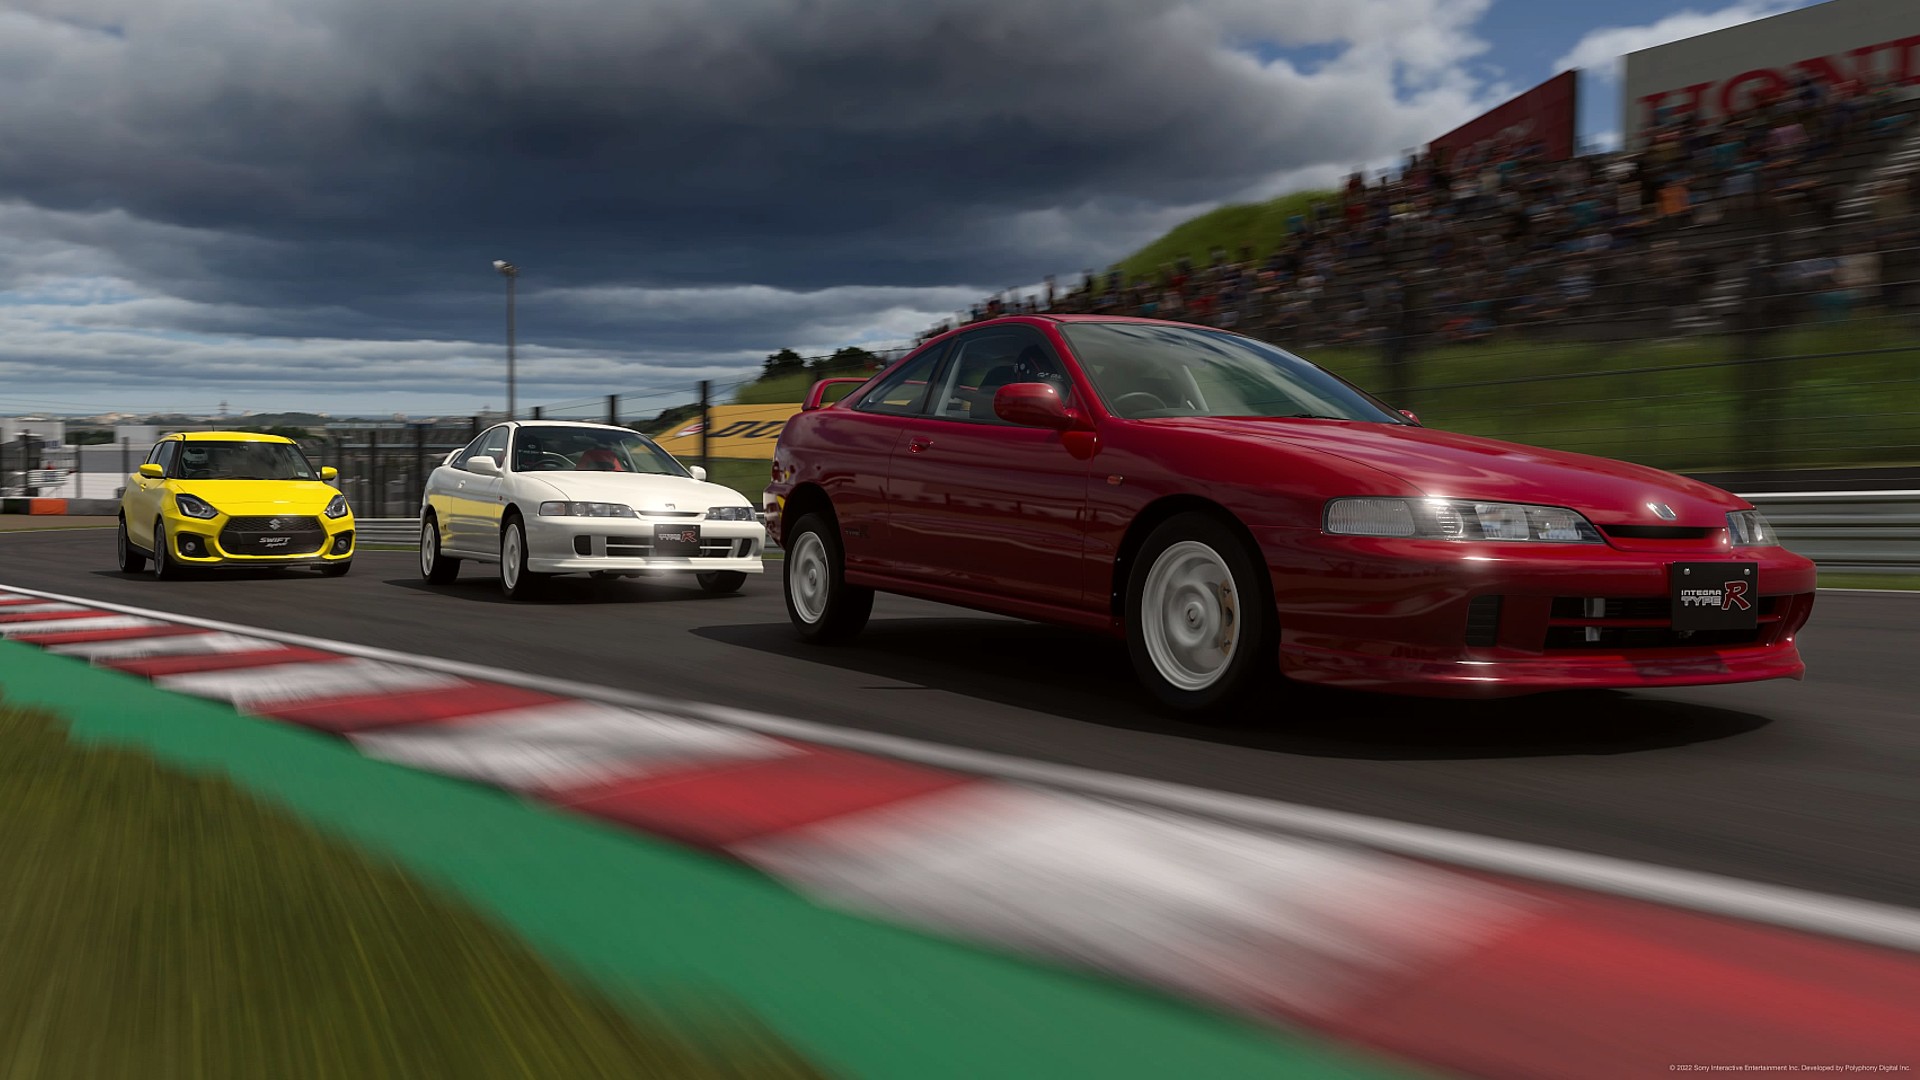 Gran Turismo 7 review – unrivalled racing